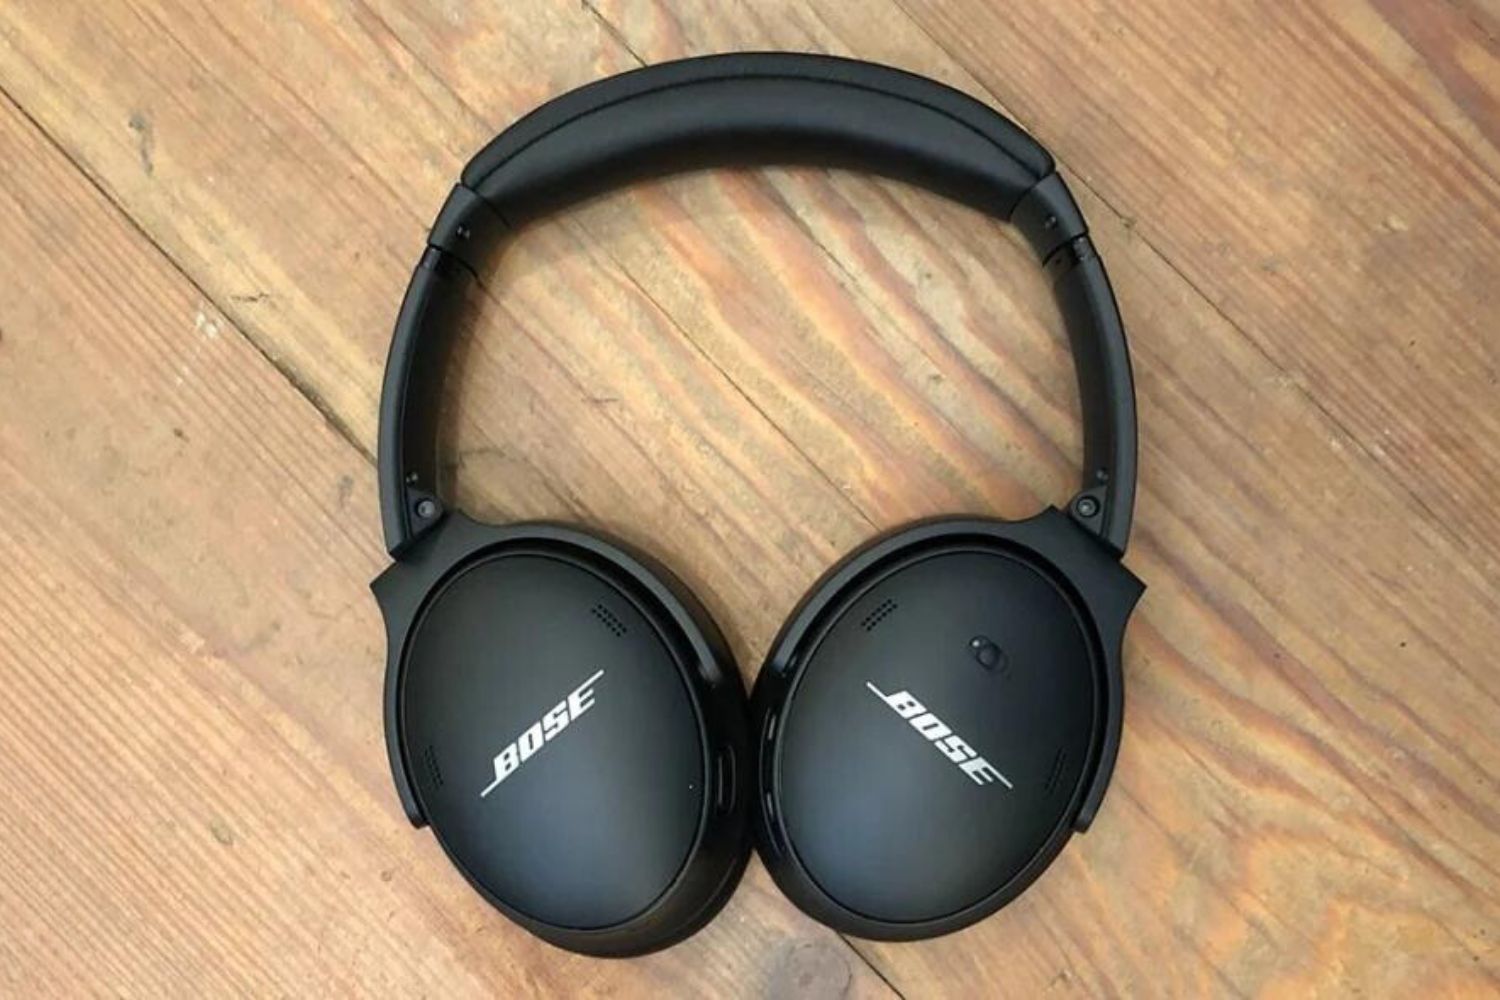 How To Connect Bose Over-Ear Headphones